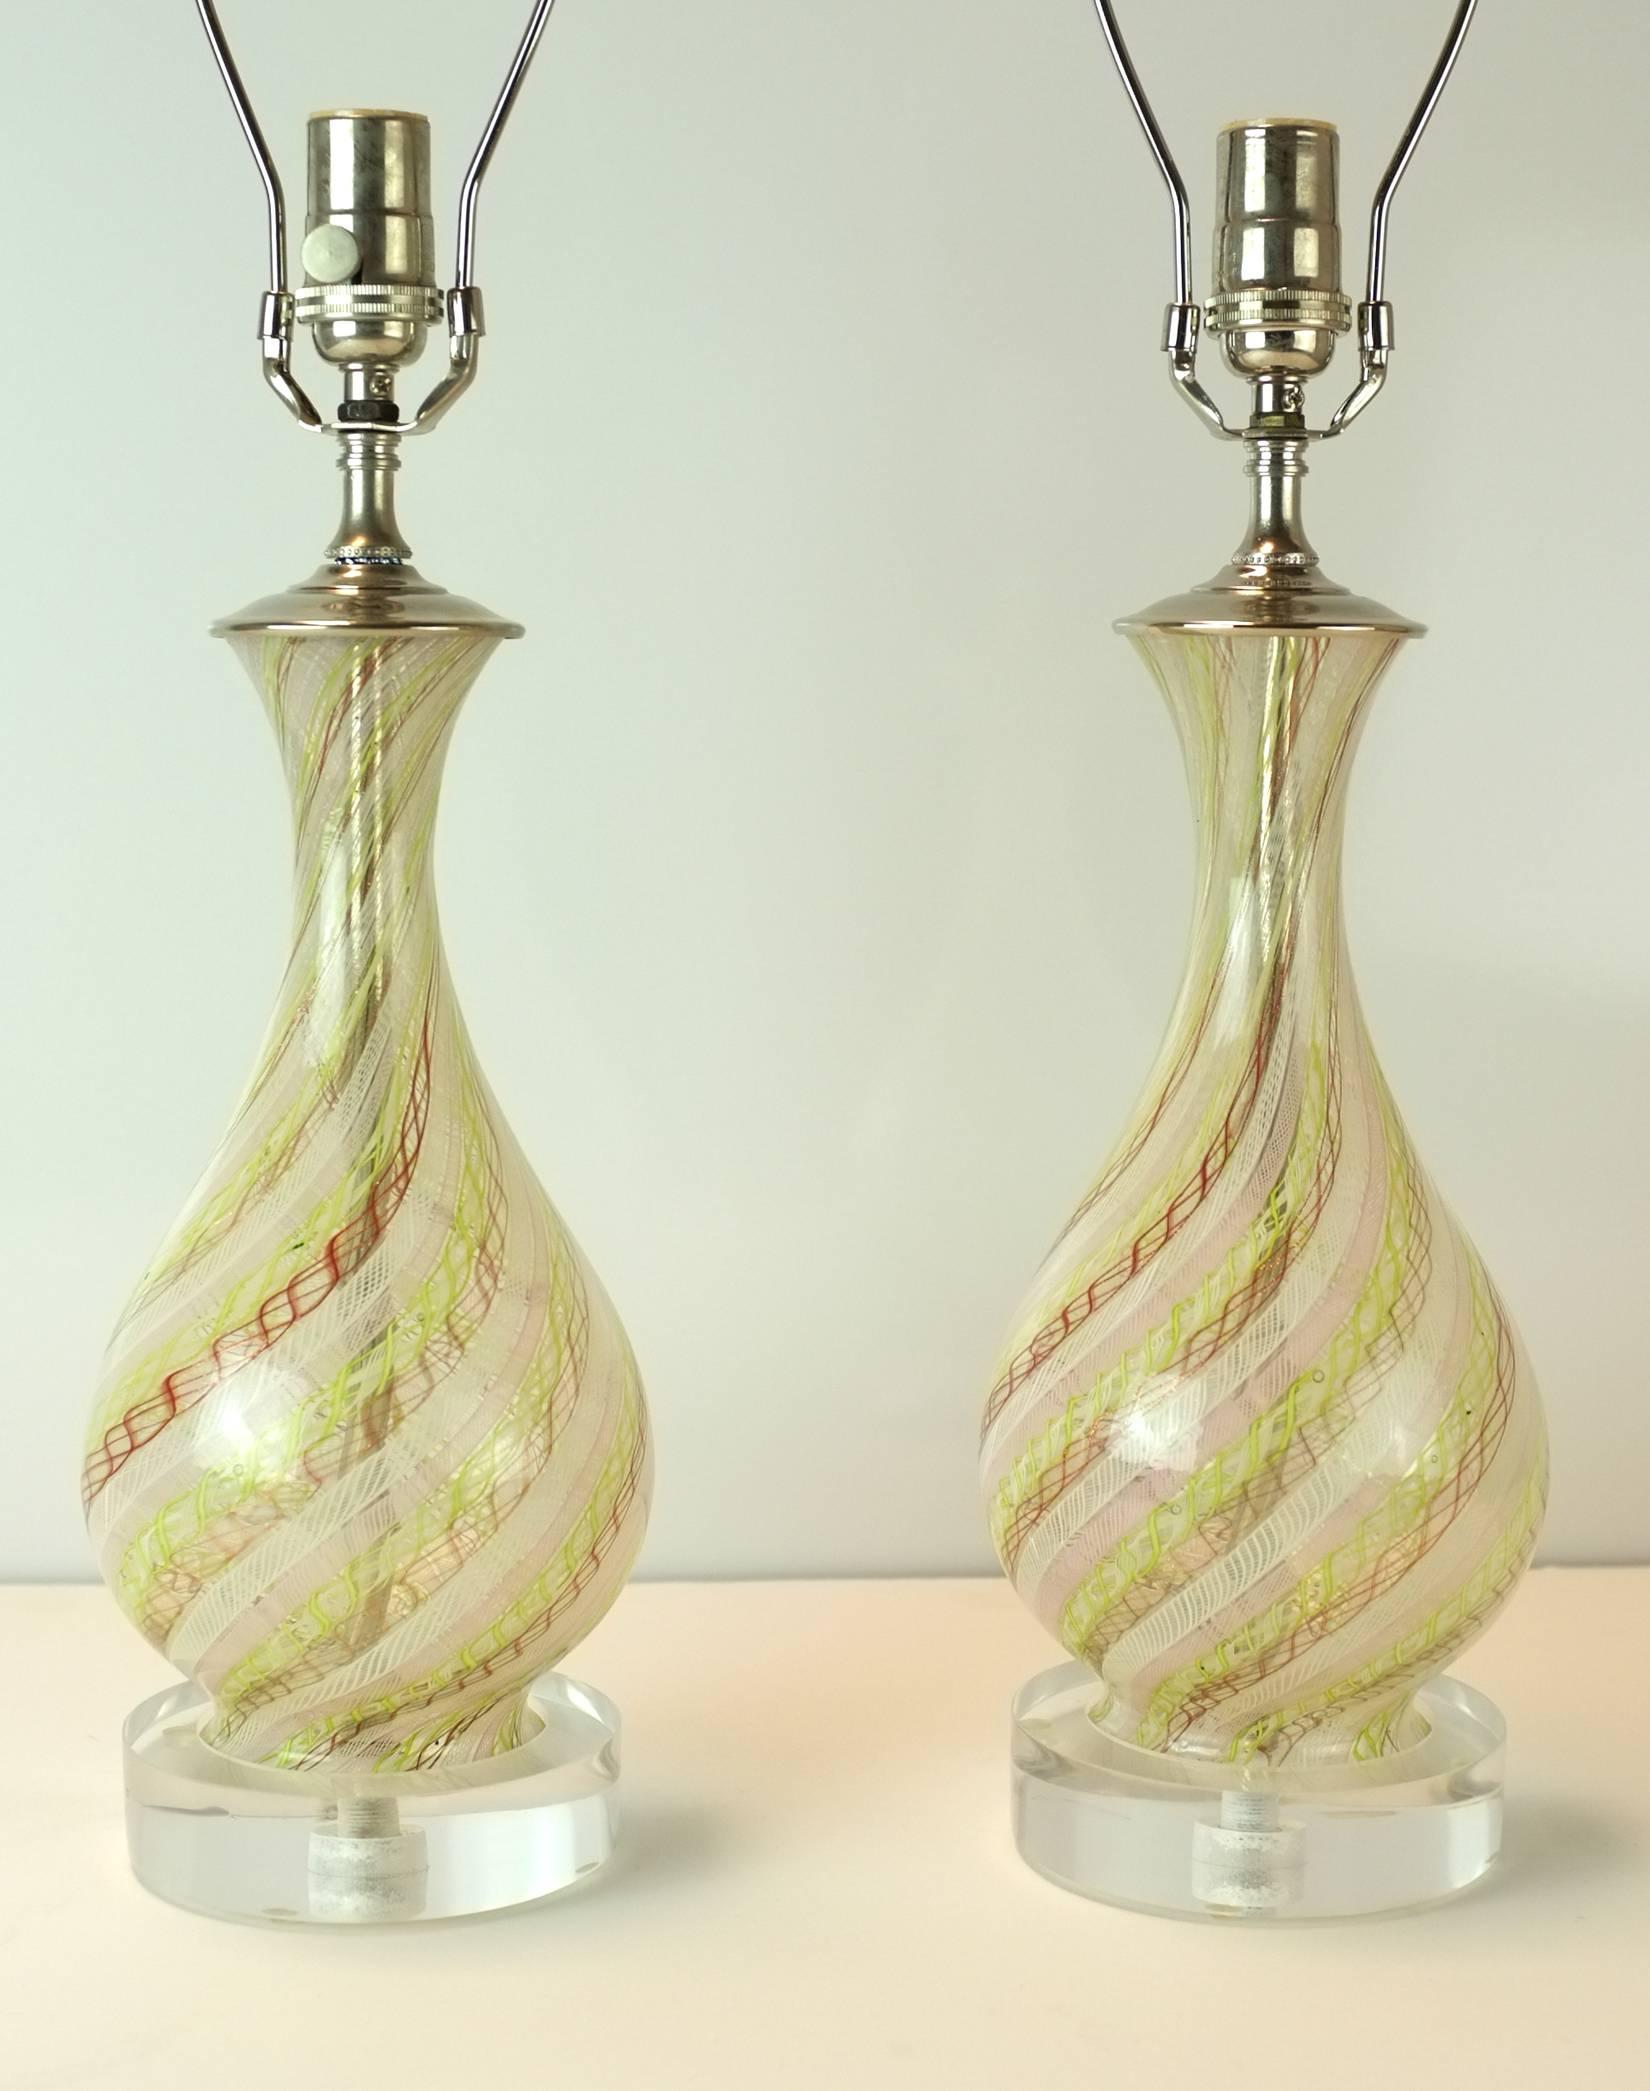 A good pair of Italian Mid-Century Mezza Filigrana Murrain glass lamps attributed to Dino Martens for Areliano Tosso.   Each baluster form swirls with citron, white, gold and bronze stripes.  The hardware is a crisp and shiny chrome and they are